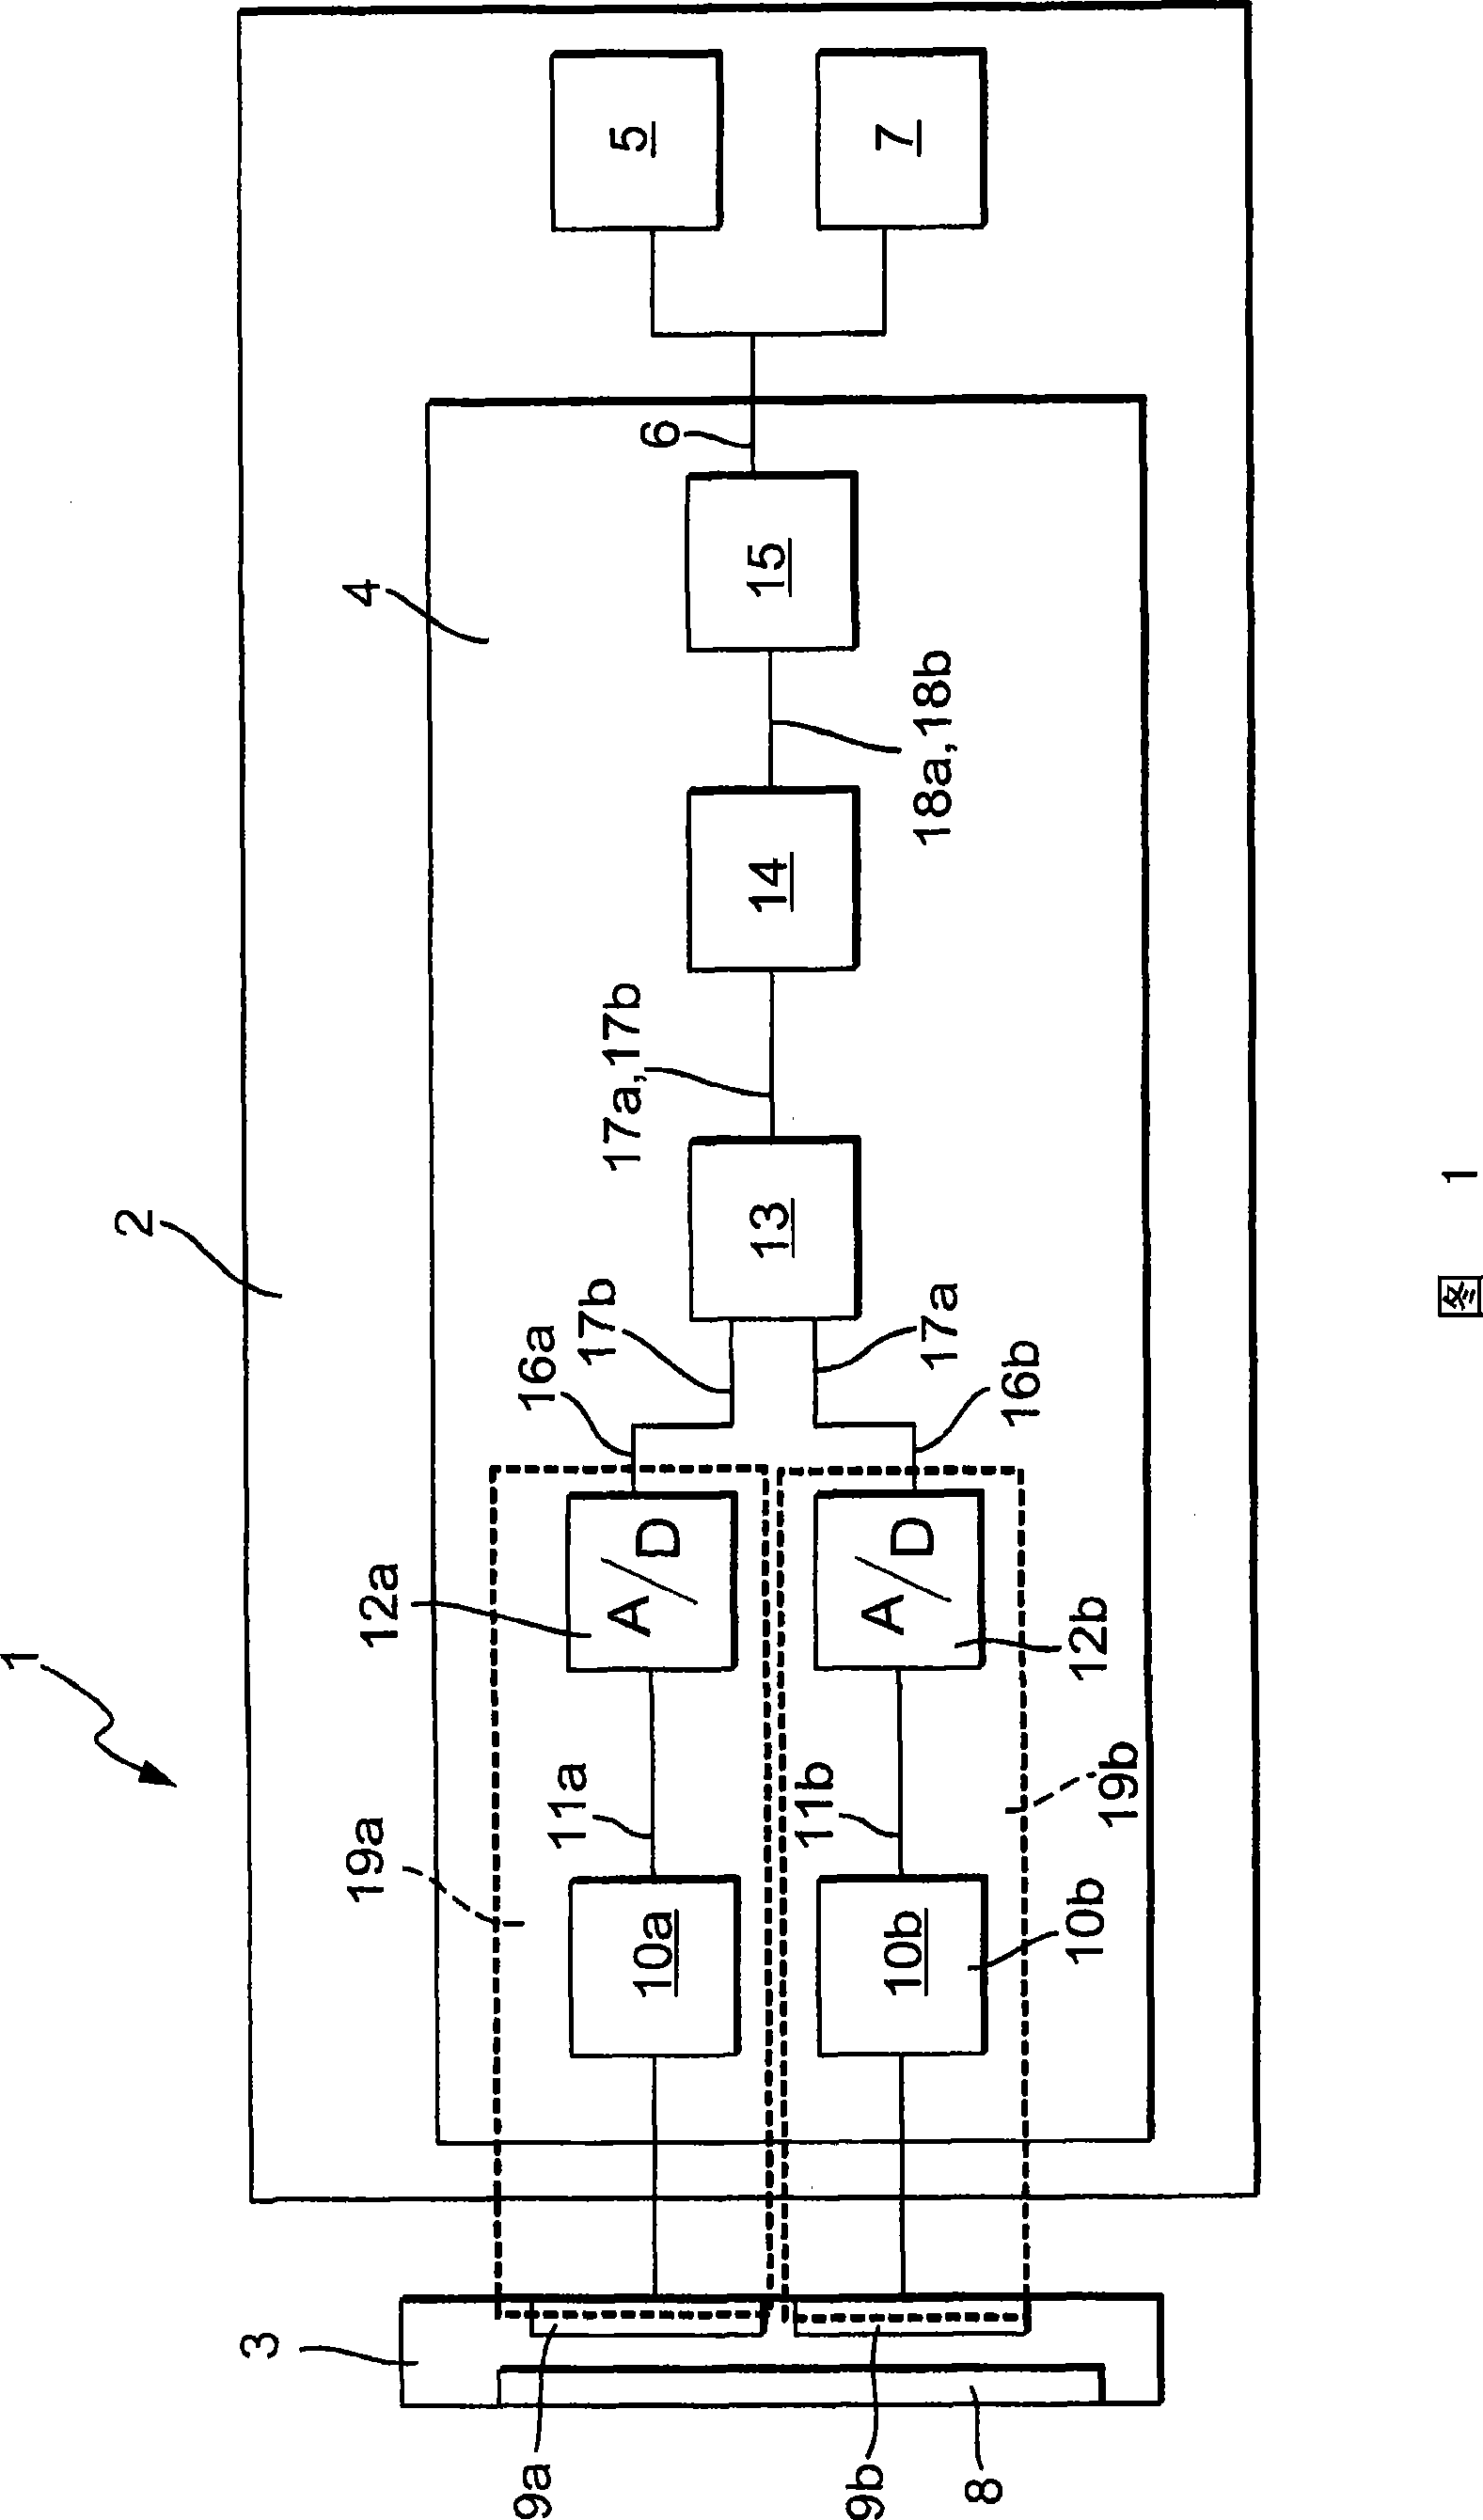 Analysis system for measuring the concentration of an analyte in a bodily fluid